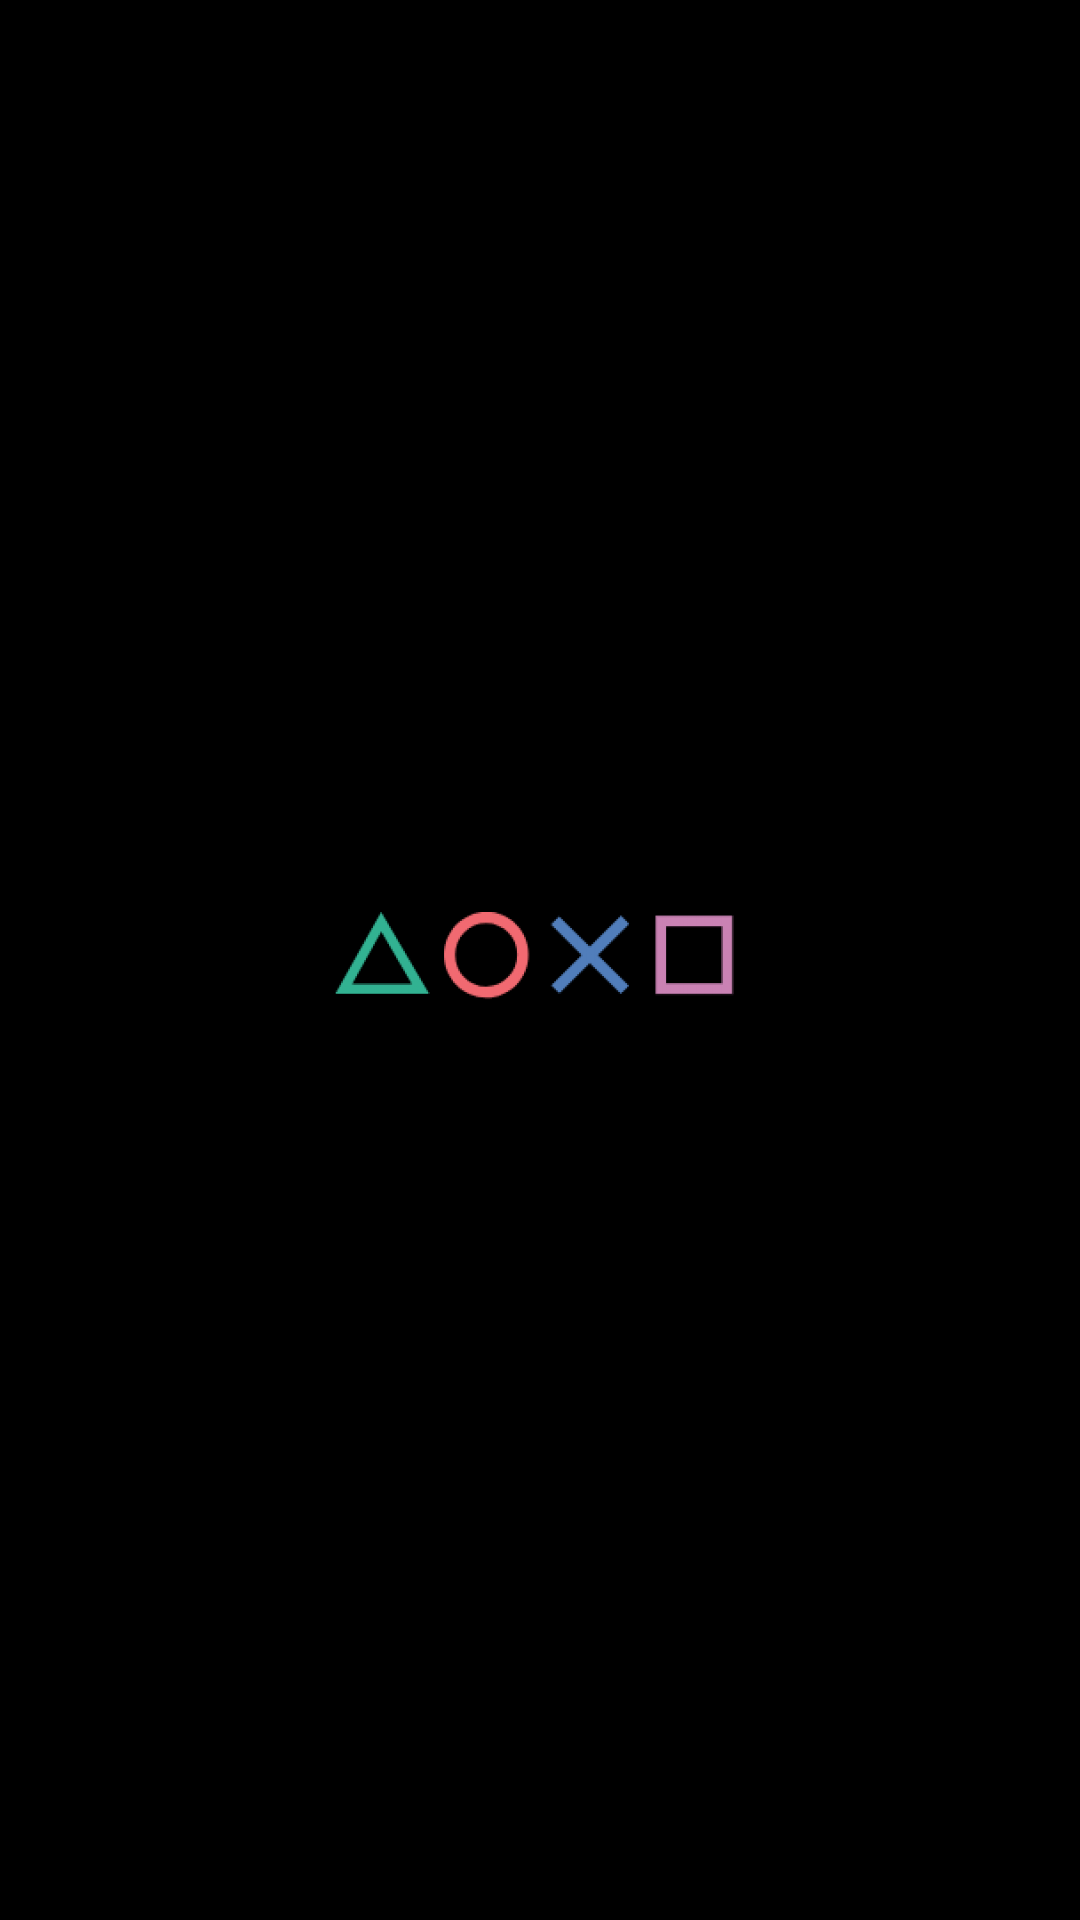 PlayStation Buttons Wallpapers - Top Free PlayStation ...